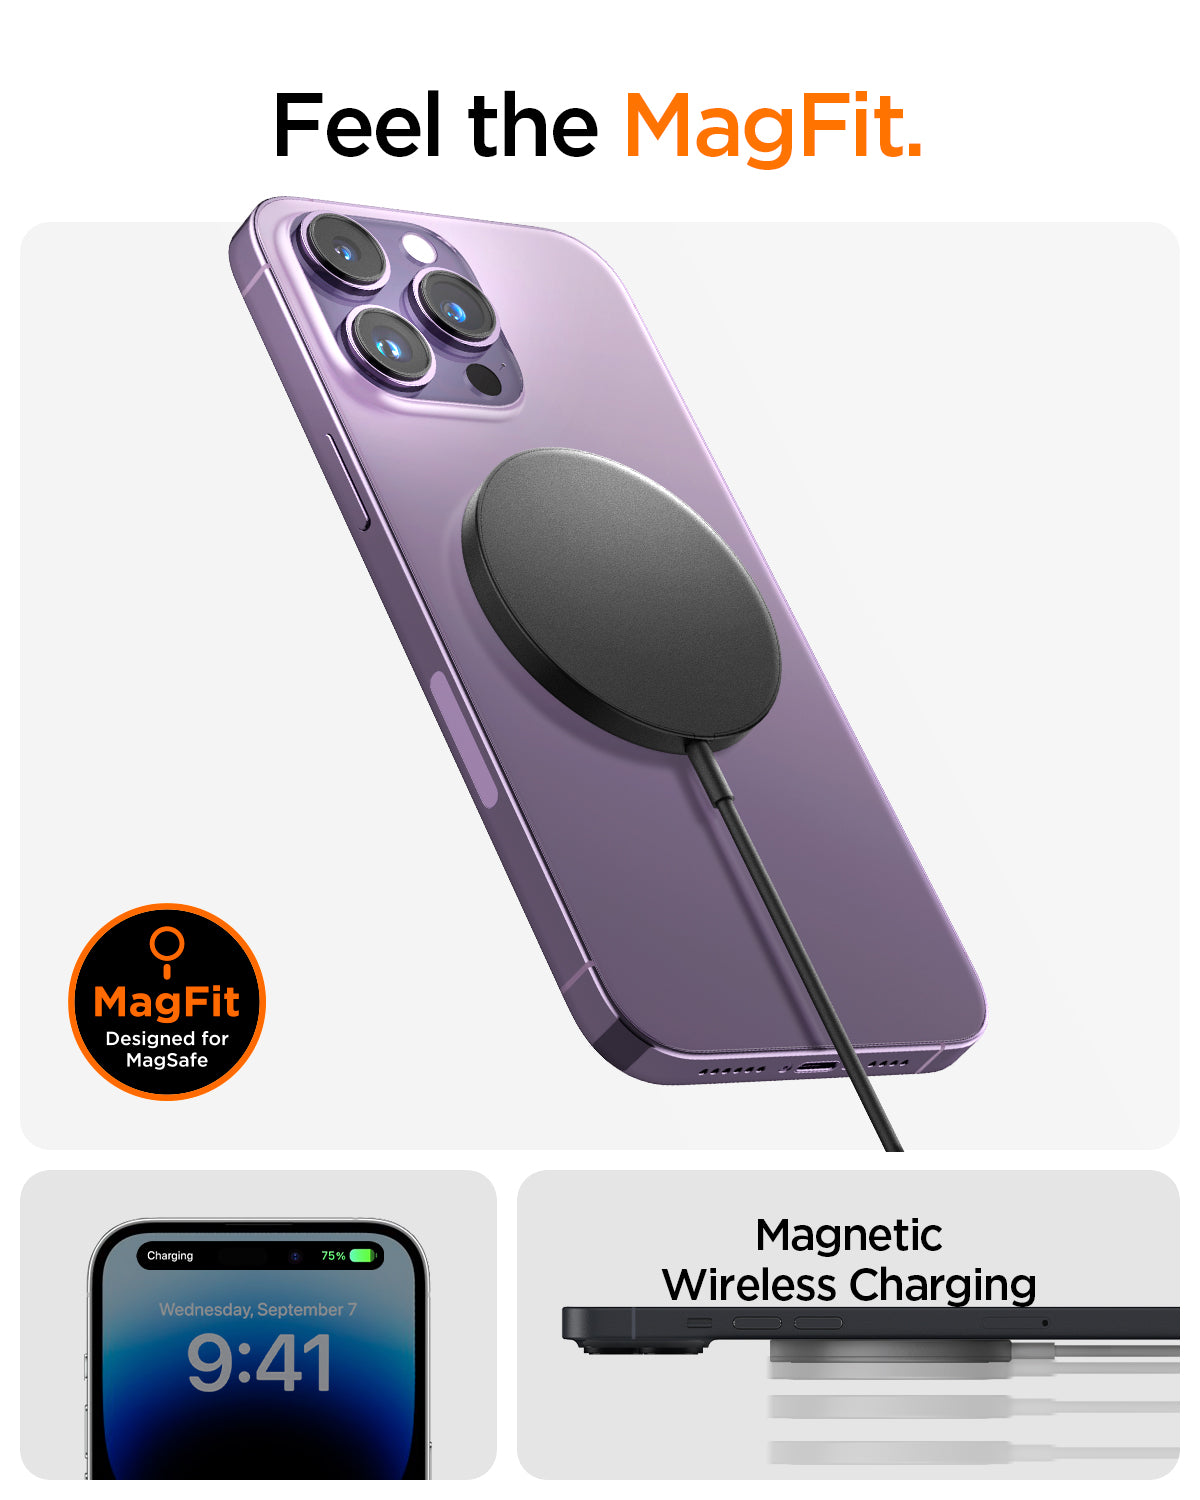 ACH04238 - ArcField™ Magnetic 7.5W Wireless Charger PF2101 (MagFit) in Black showing the Feel the MagFit. Showing back of a device attached called Magnetic Wireless Charging